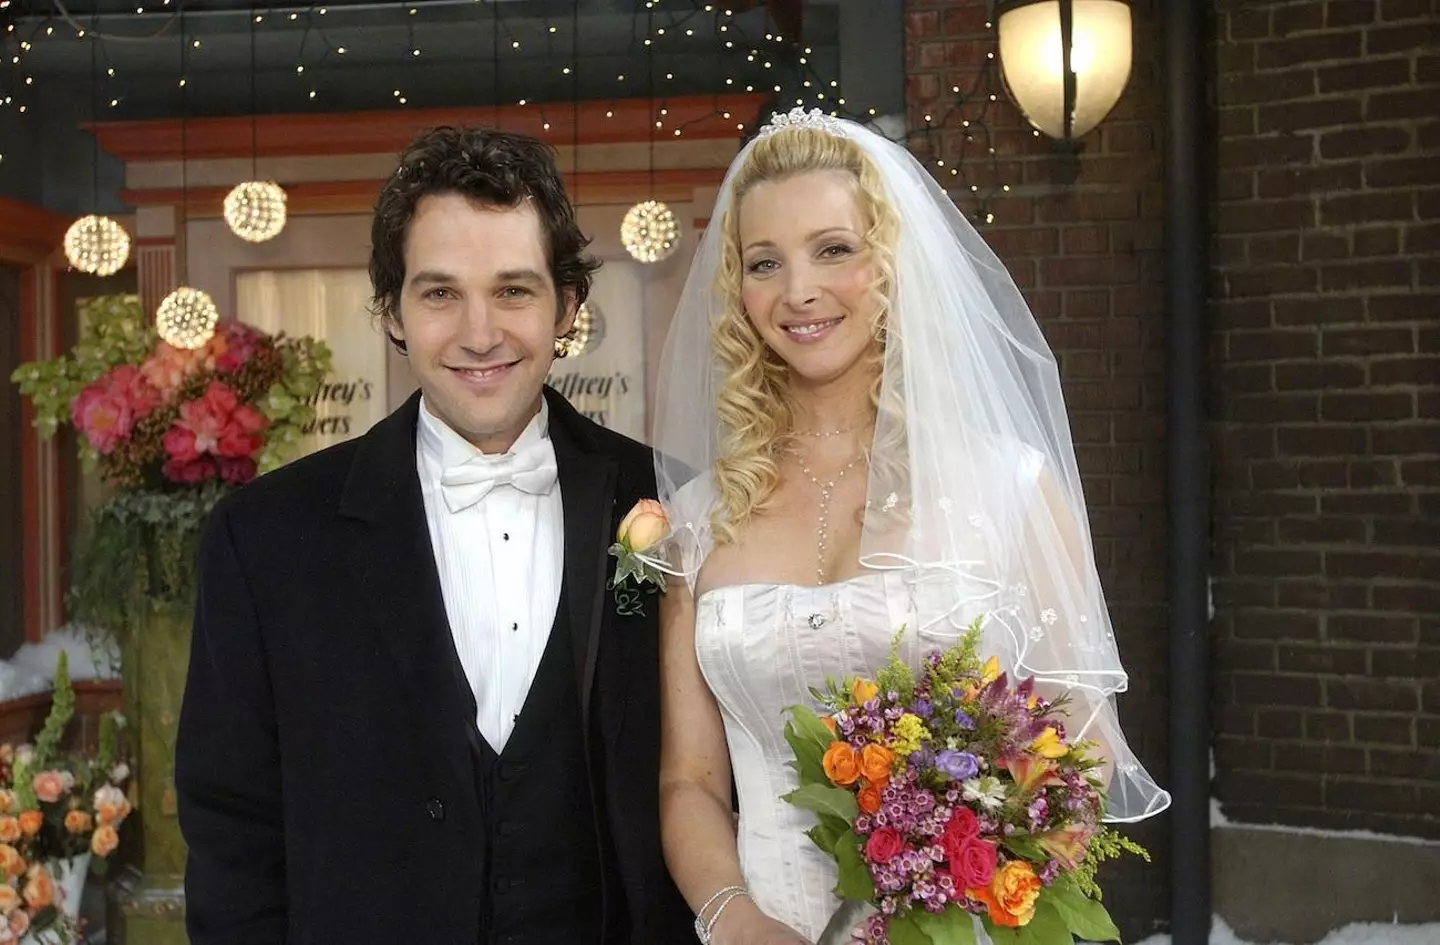 Paul Rudd famously landed the role as Phoebe Buffay's (Lisa Kudrow) love interest, Mike Hannigan.